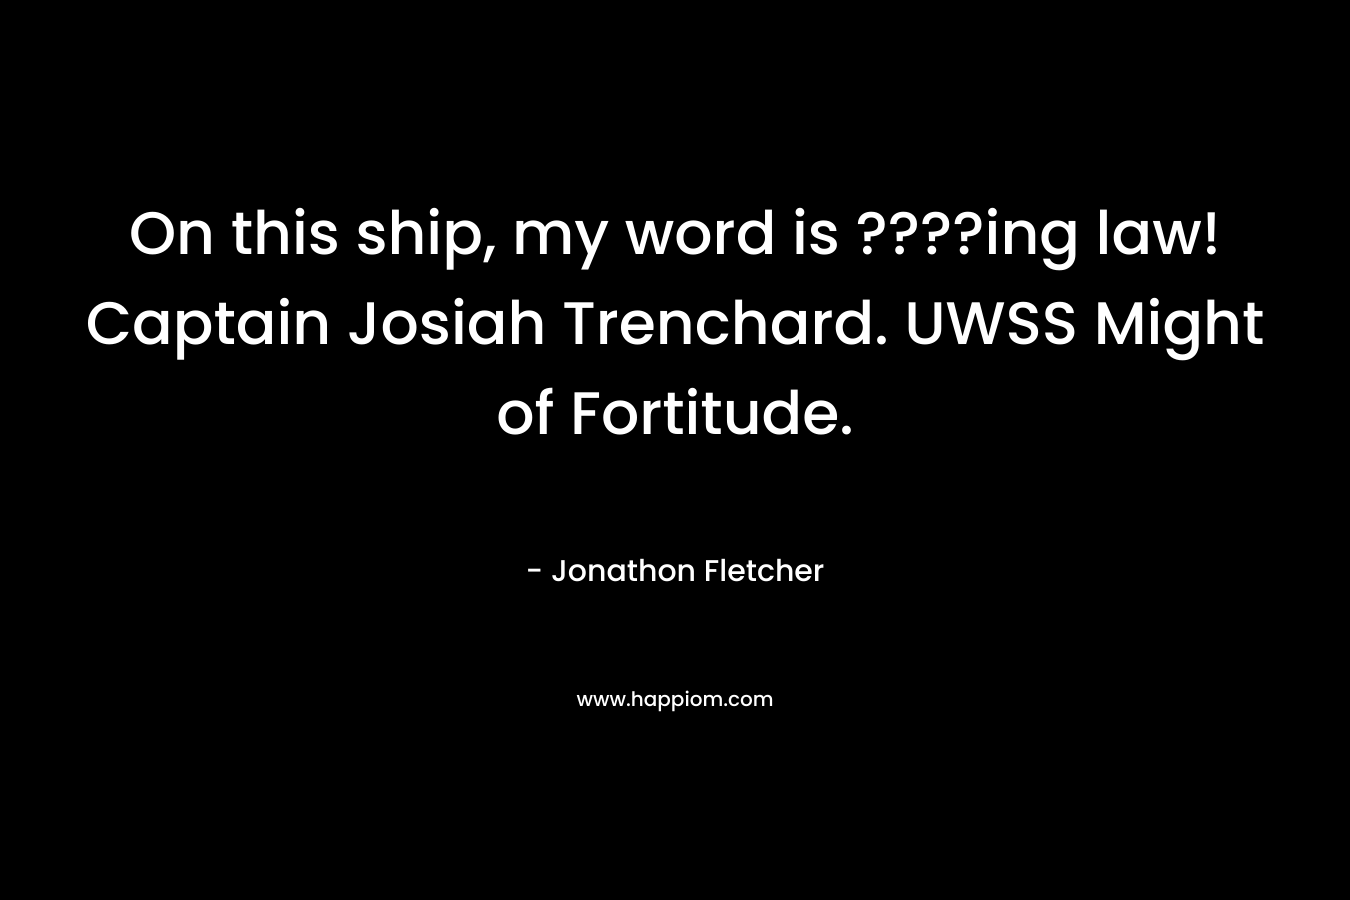 On this ship, my word is ????ing law! Captain Josiah Trenchard. UWSS Might of Fortitude.